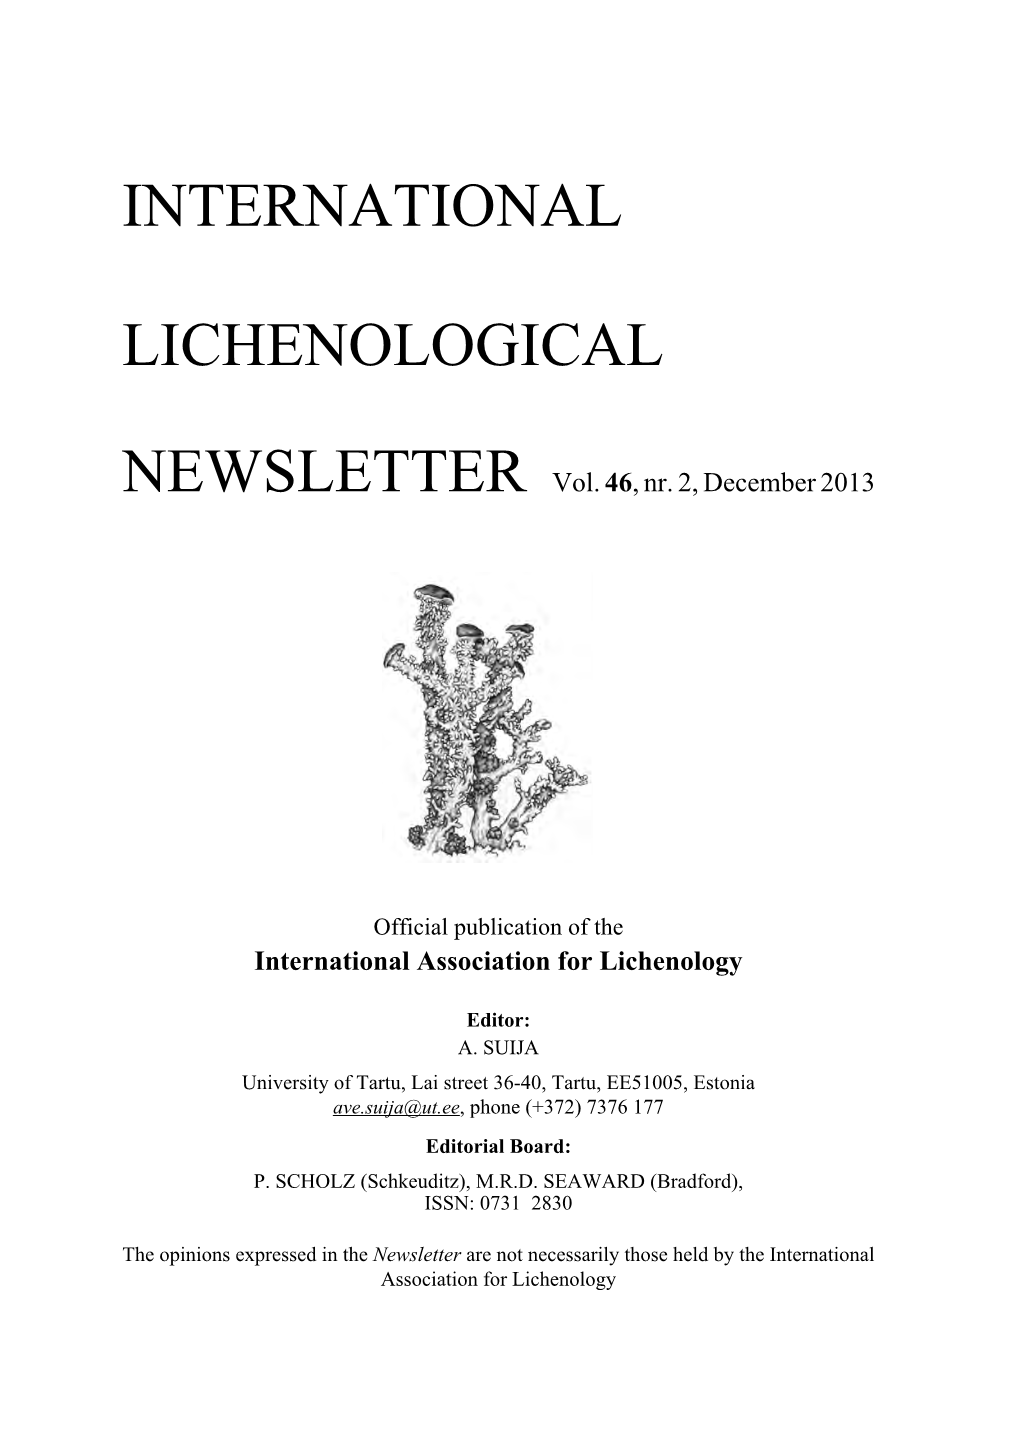 International Lichenological Newsletter Is the Official Publication of IAL